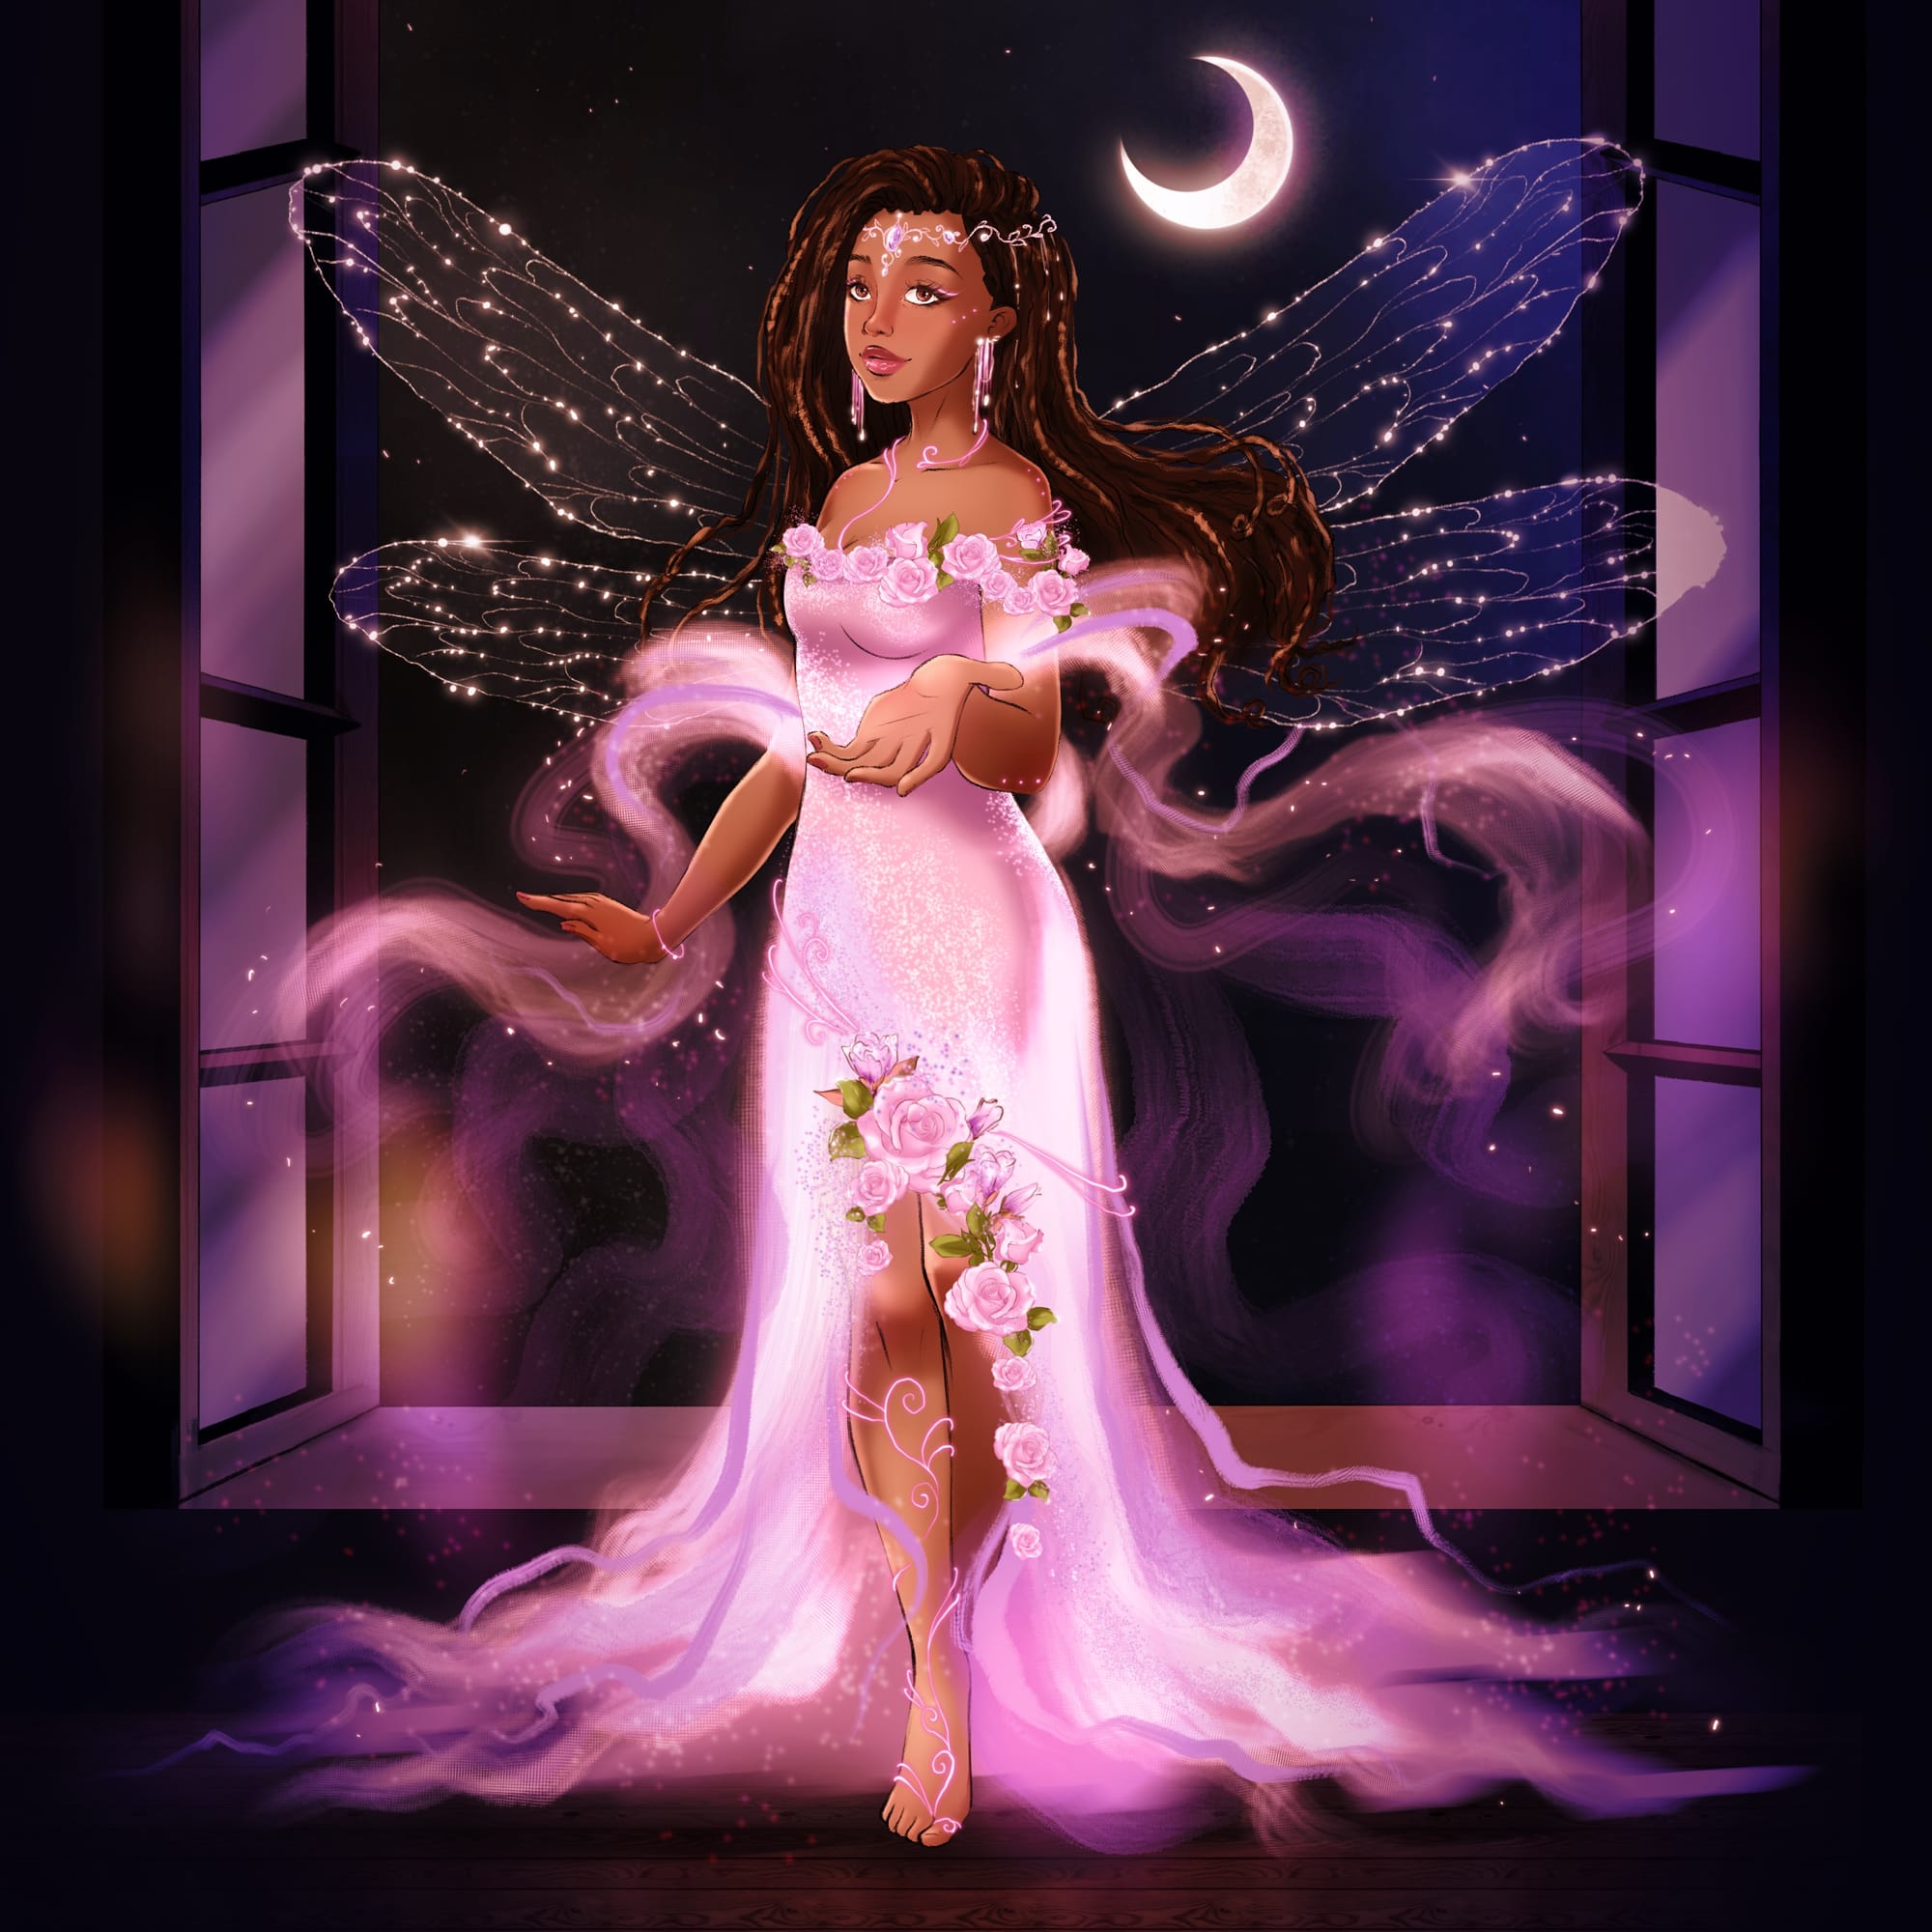 Art by Tetiana Hut. A fairy, in the form of a beautiful Black woman in a glowing ethereal pink dress, stands in a moonlit room by an open window, holding out her hand to invite a human child to come with her.